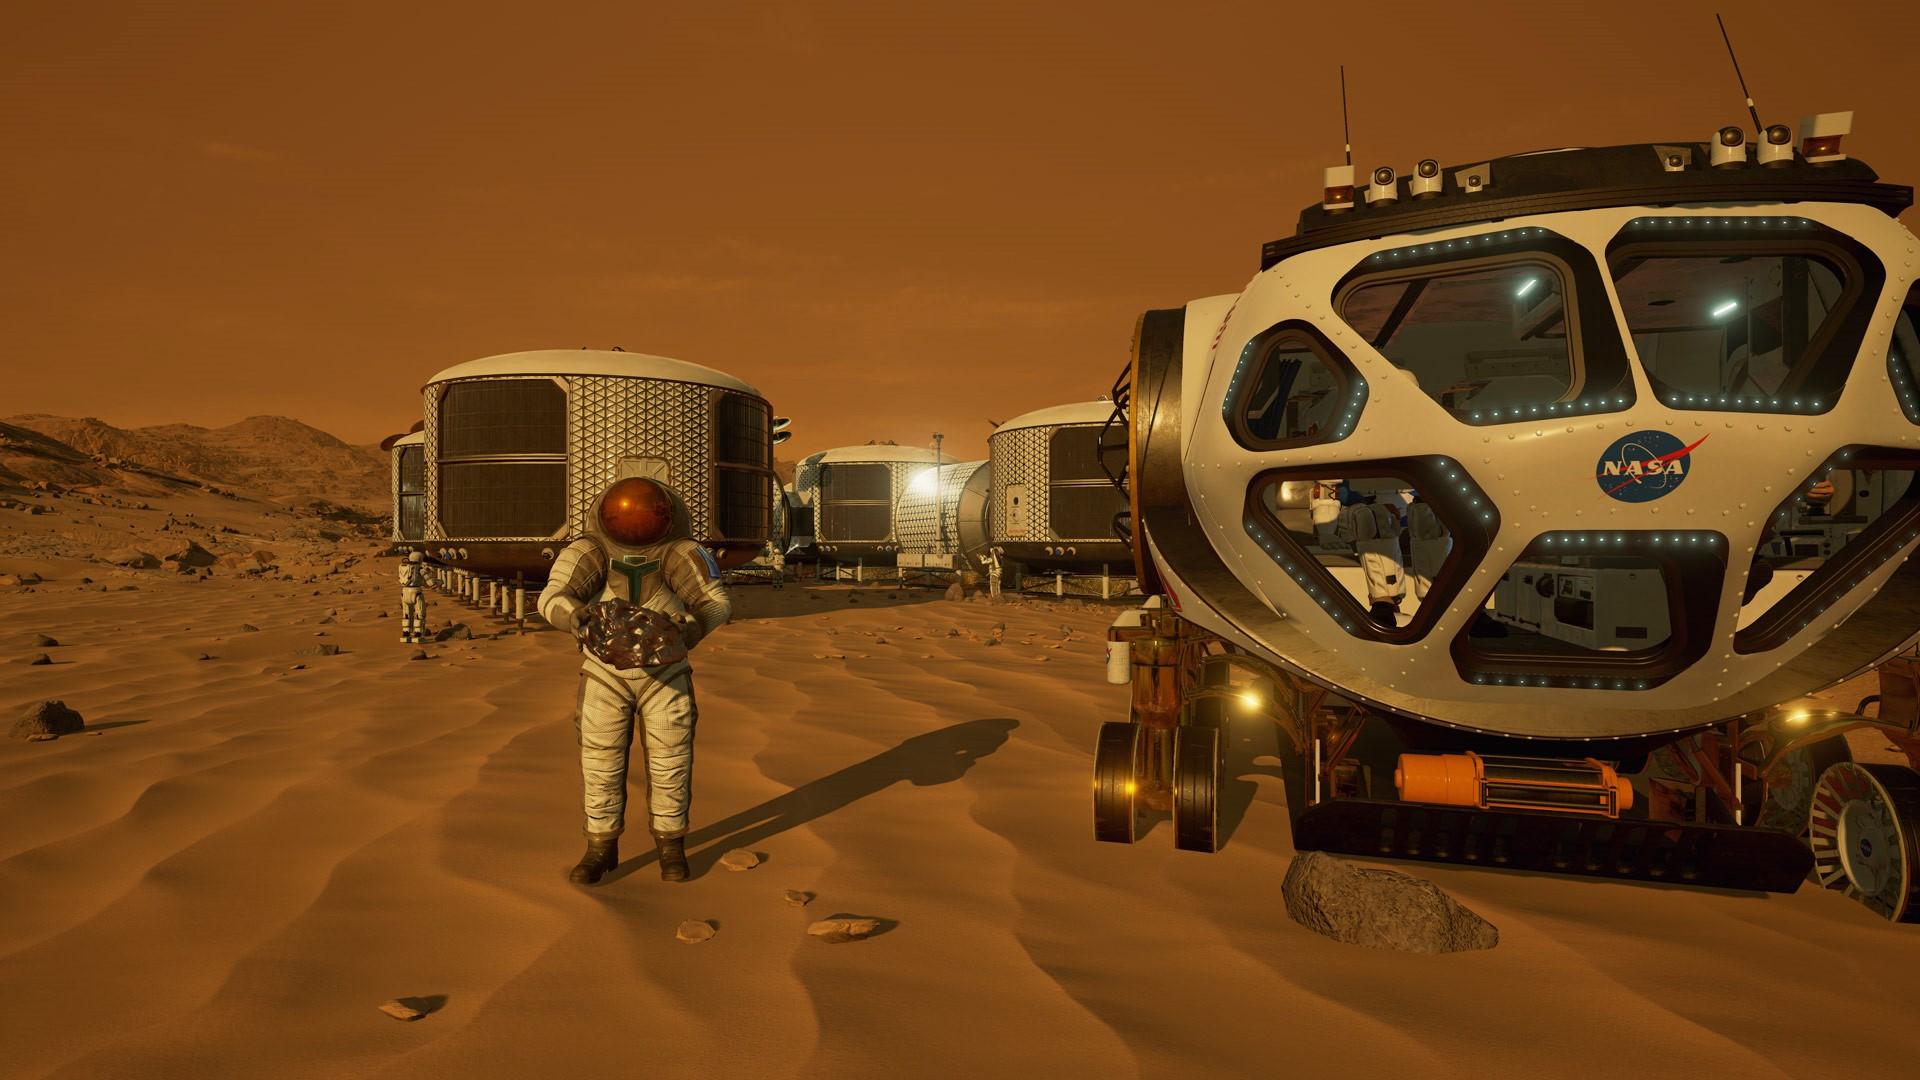 HD image from Mars 2030 VR experience